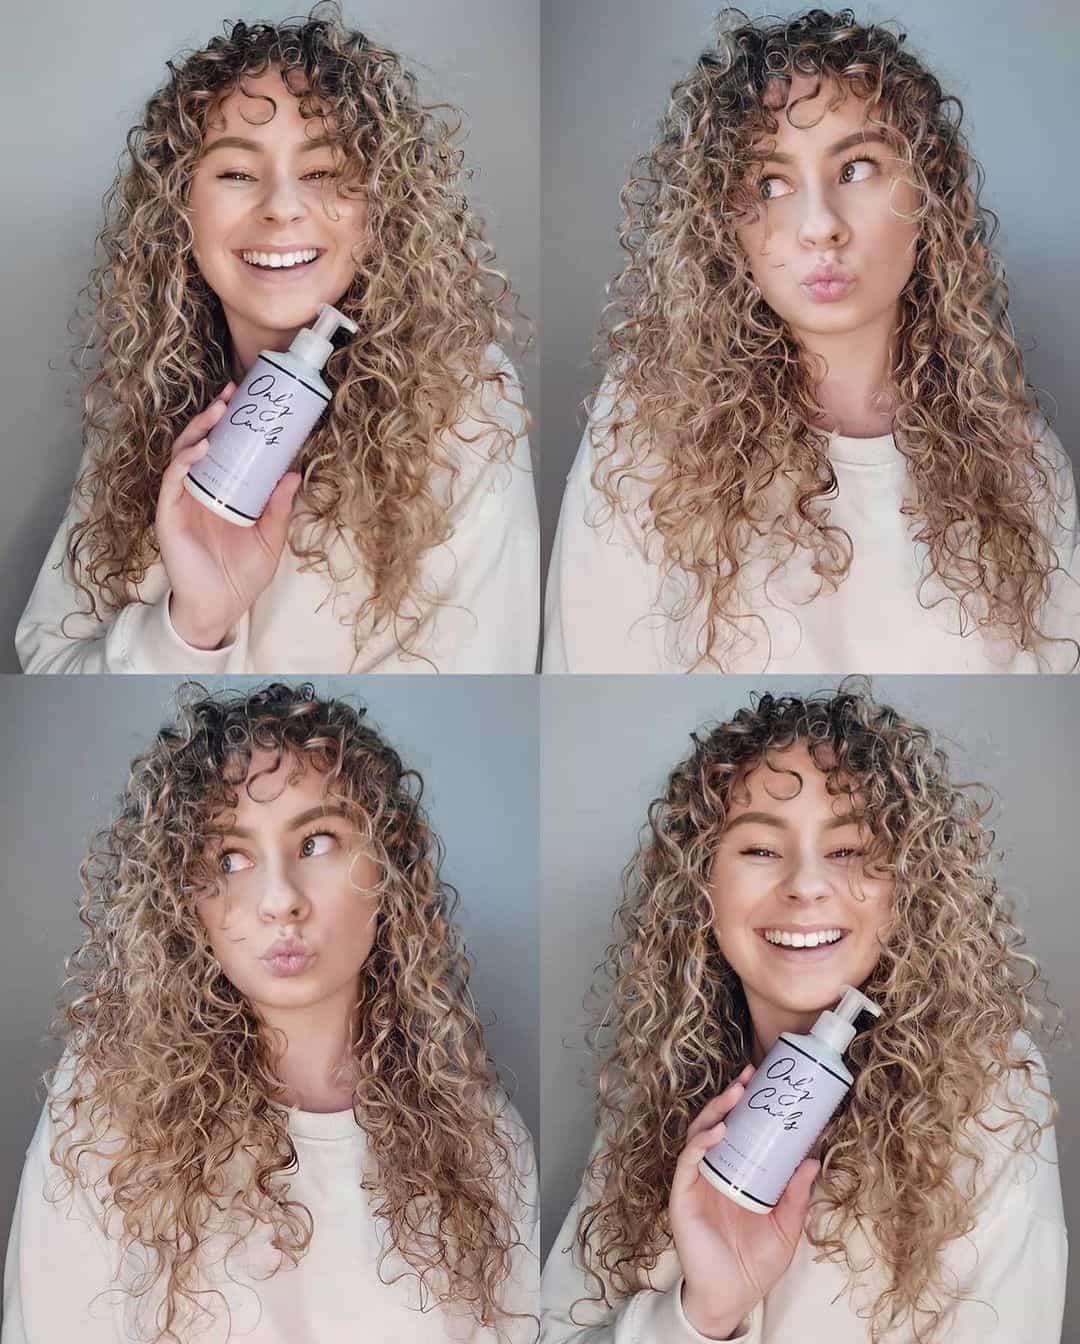 10 Curly Hair Mistakes to Avoid and How to Correct Them